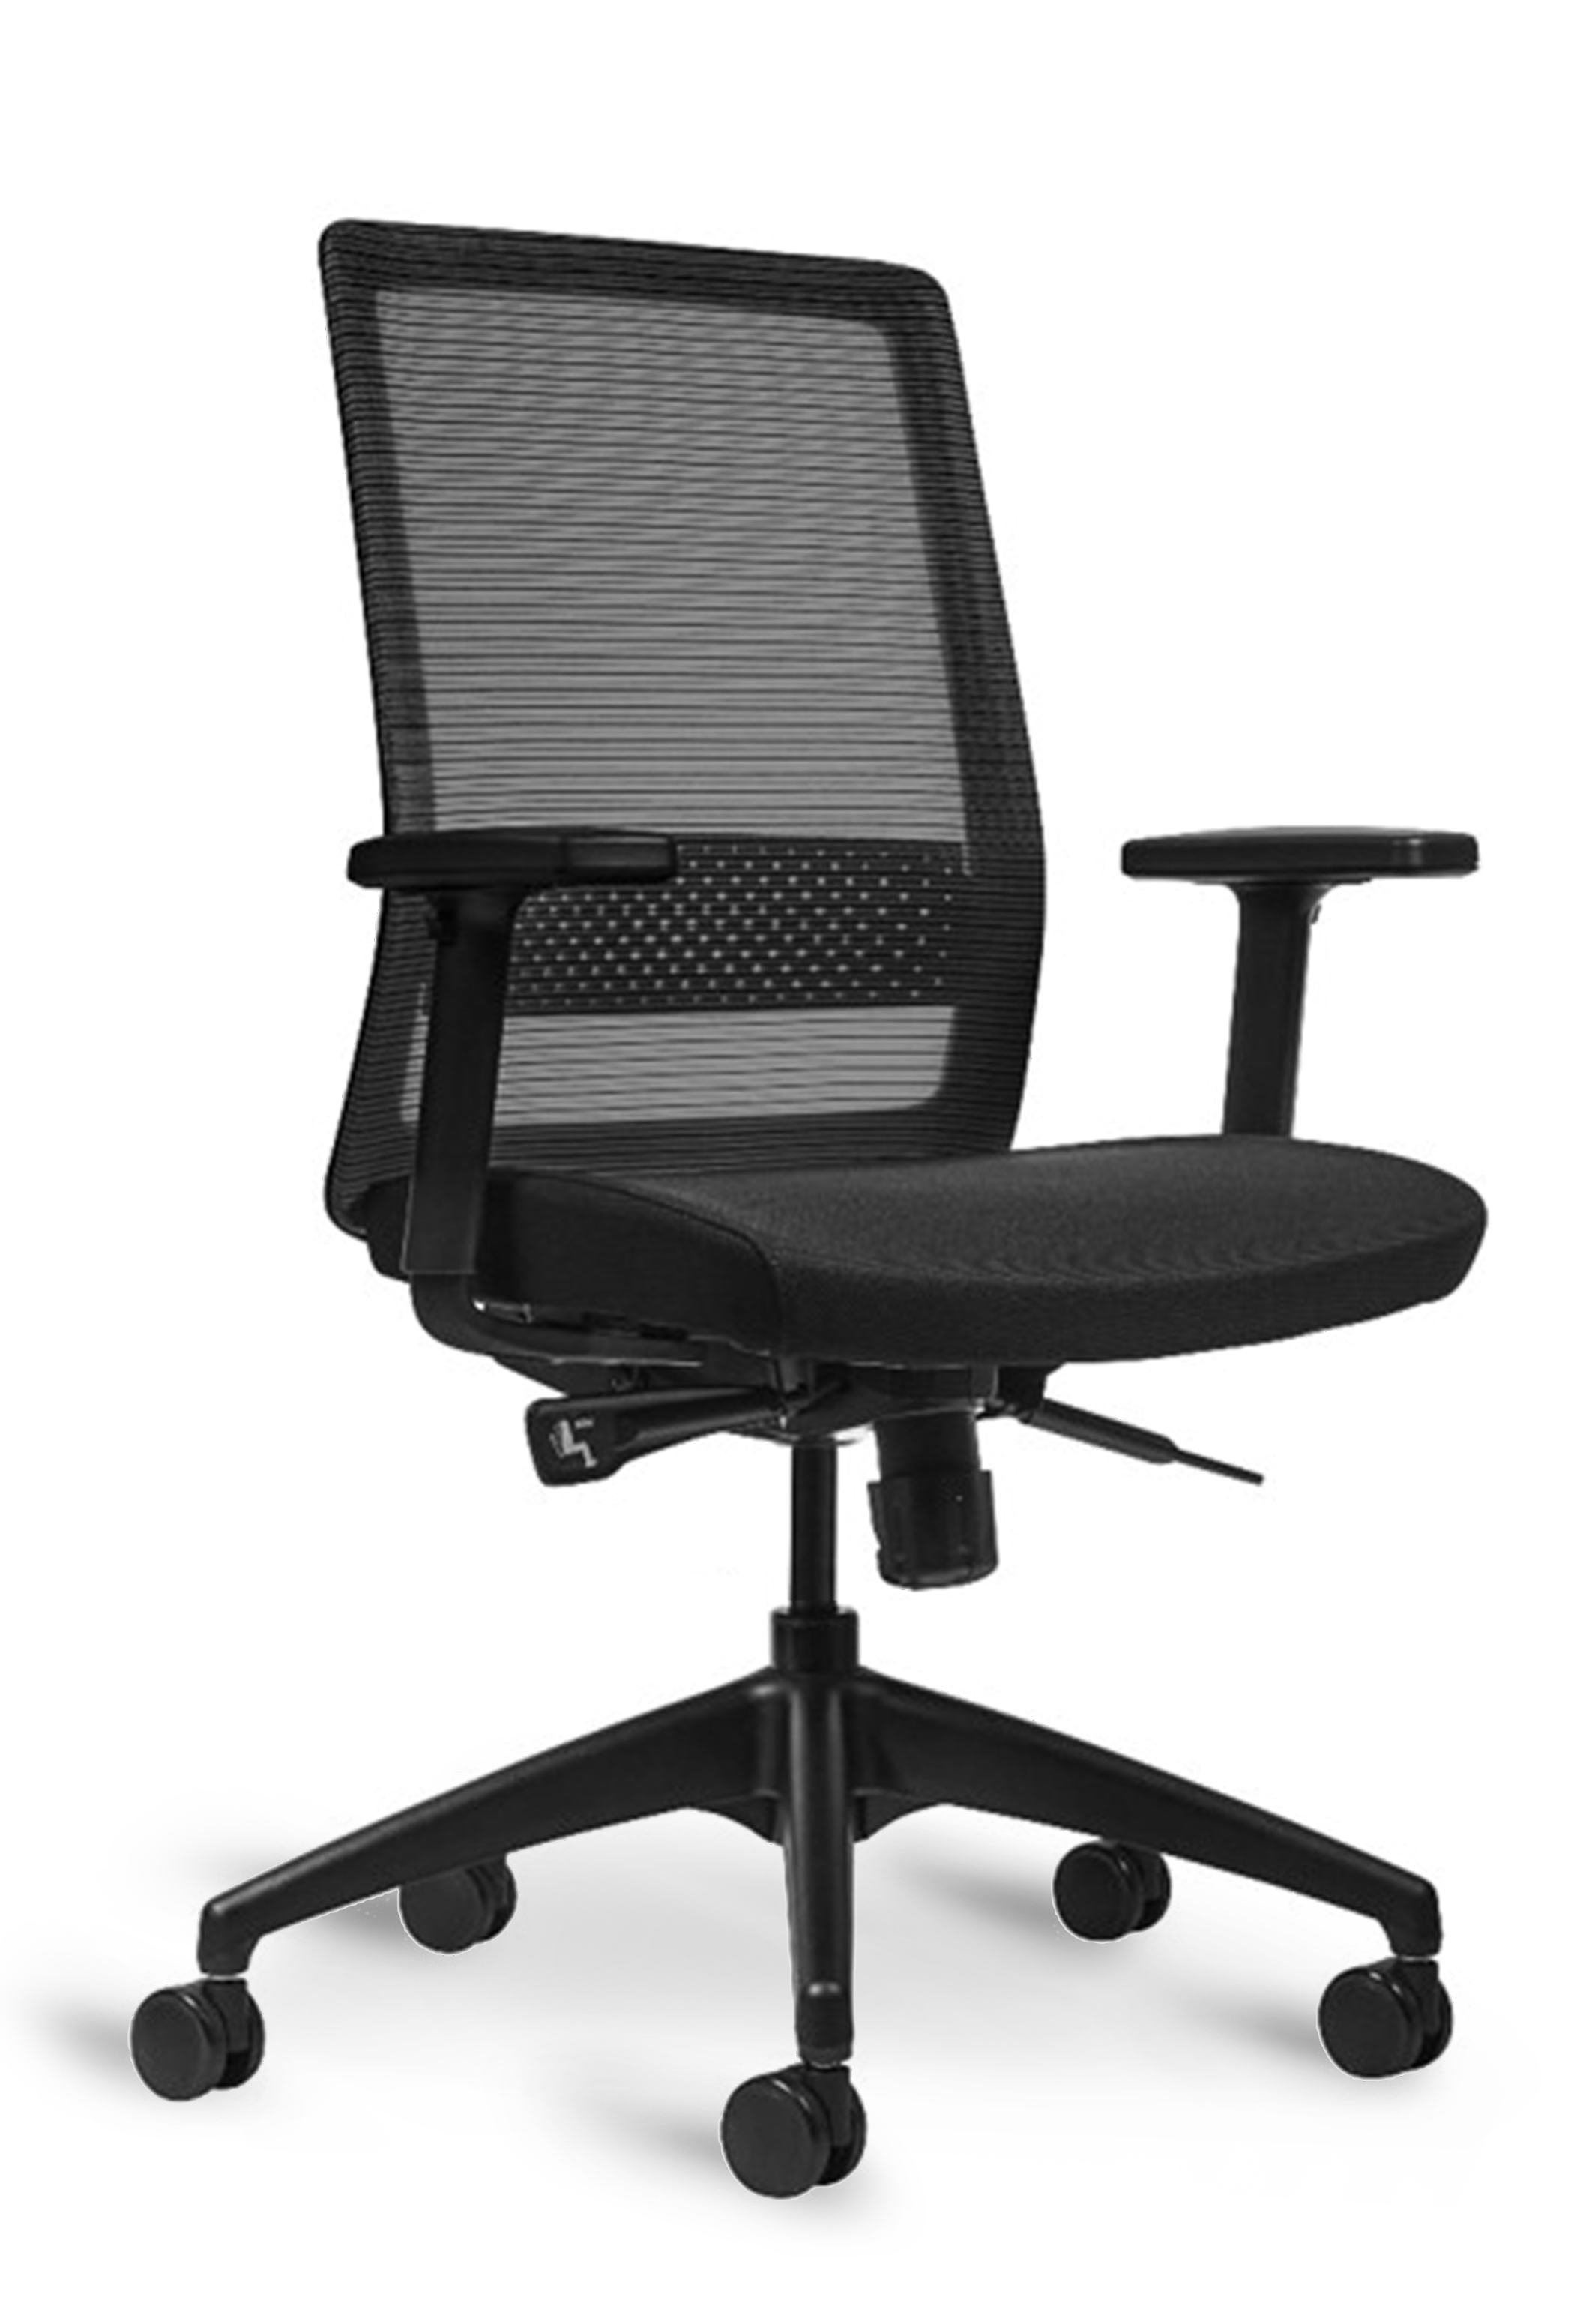 WS - S30 Task Chair - Black&Dark Grey (Front angle)